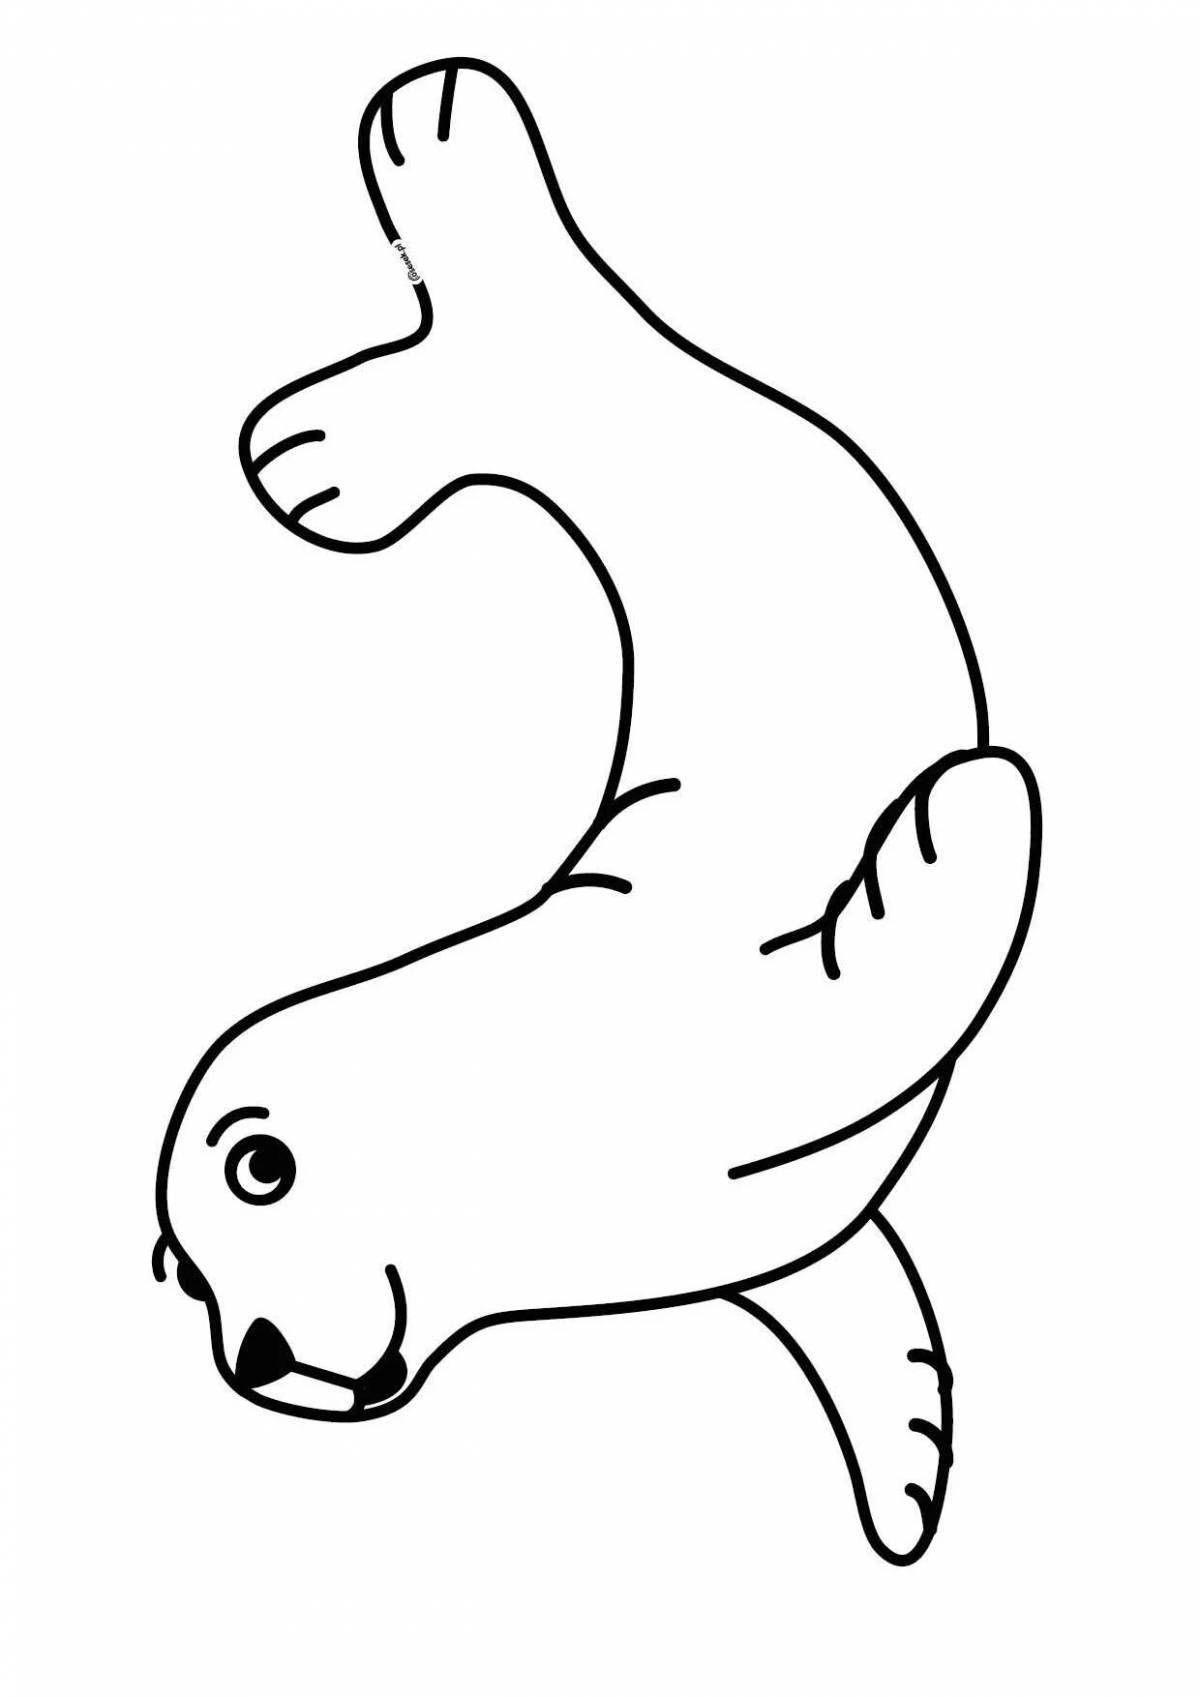 Awesome harbor seal coloring page